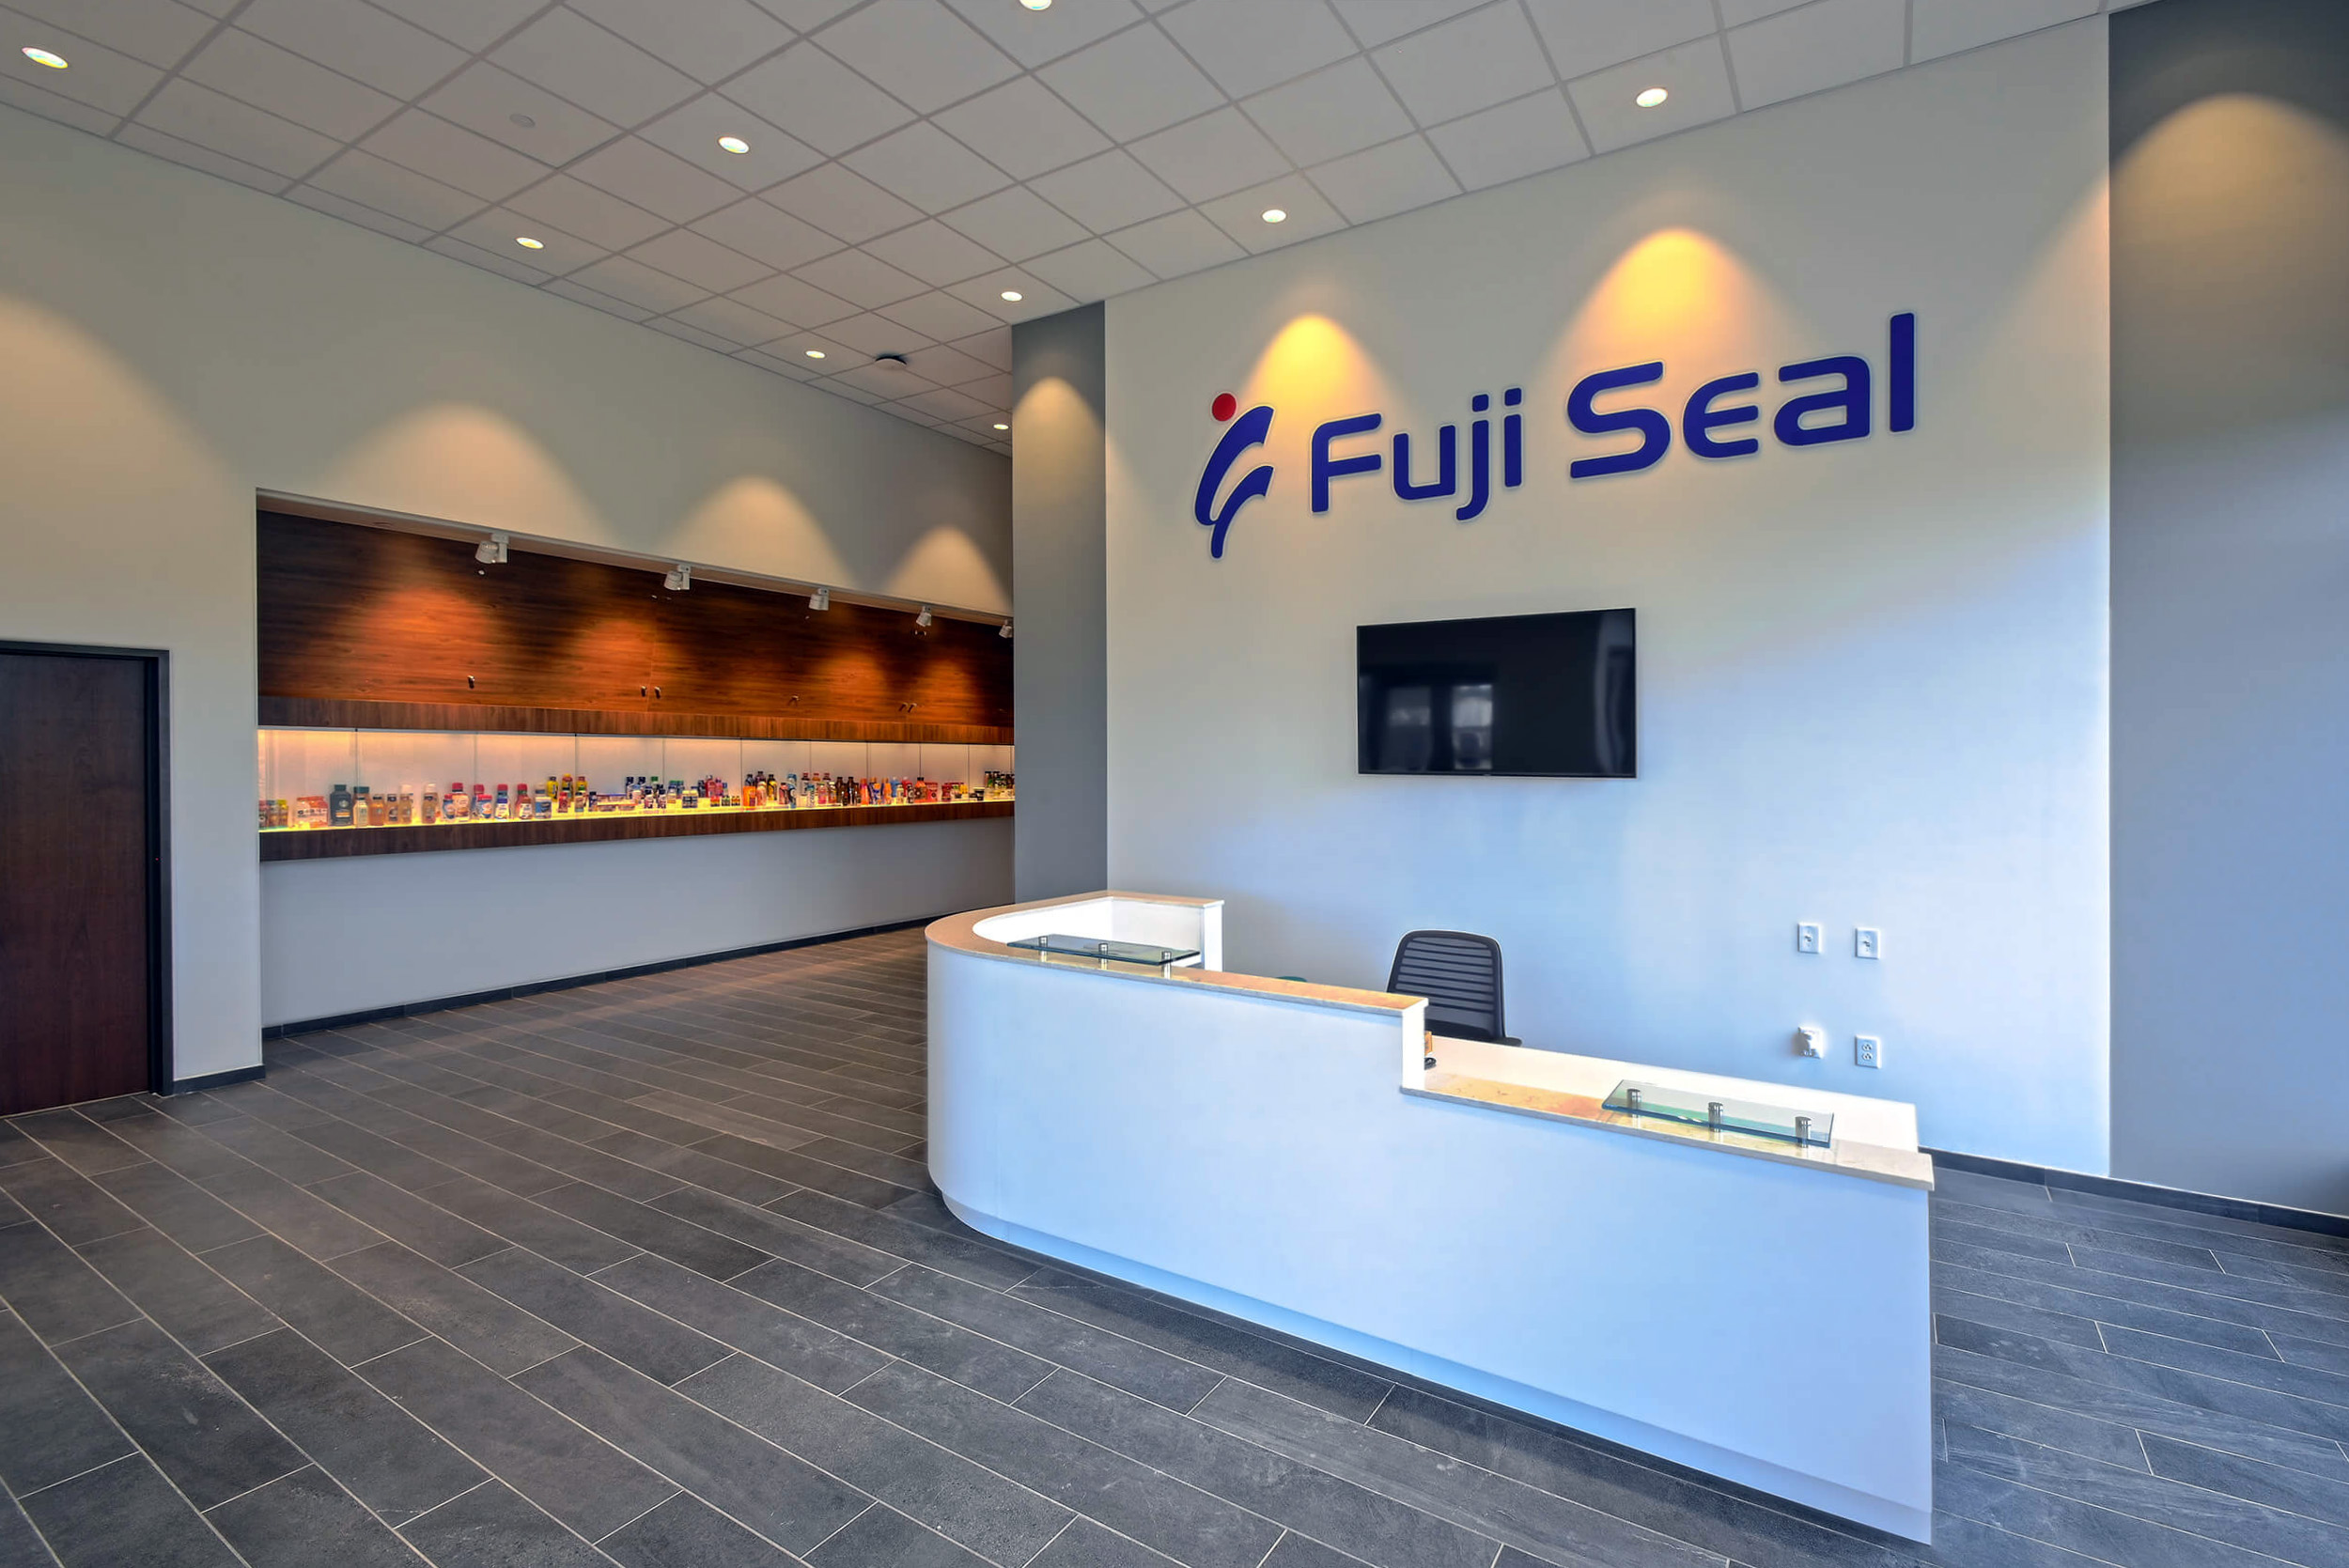 American Fuji Seal opened their new facility in Trivium Corporate Center in April 2023.